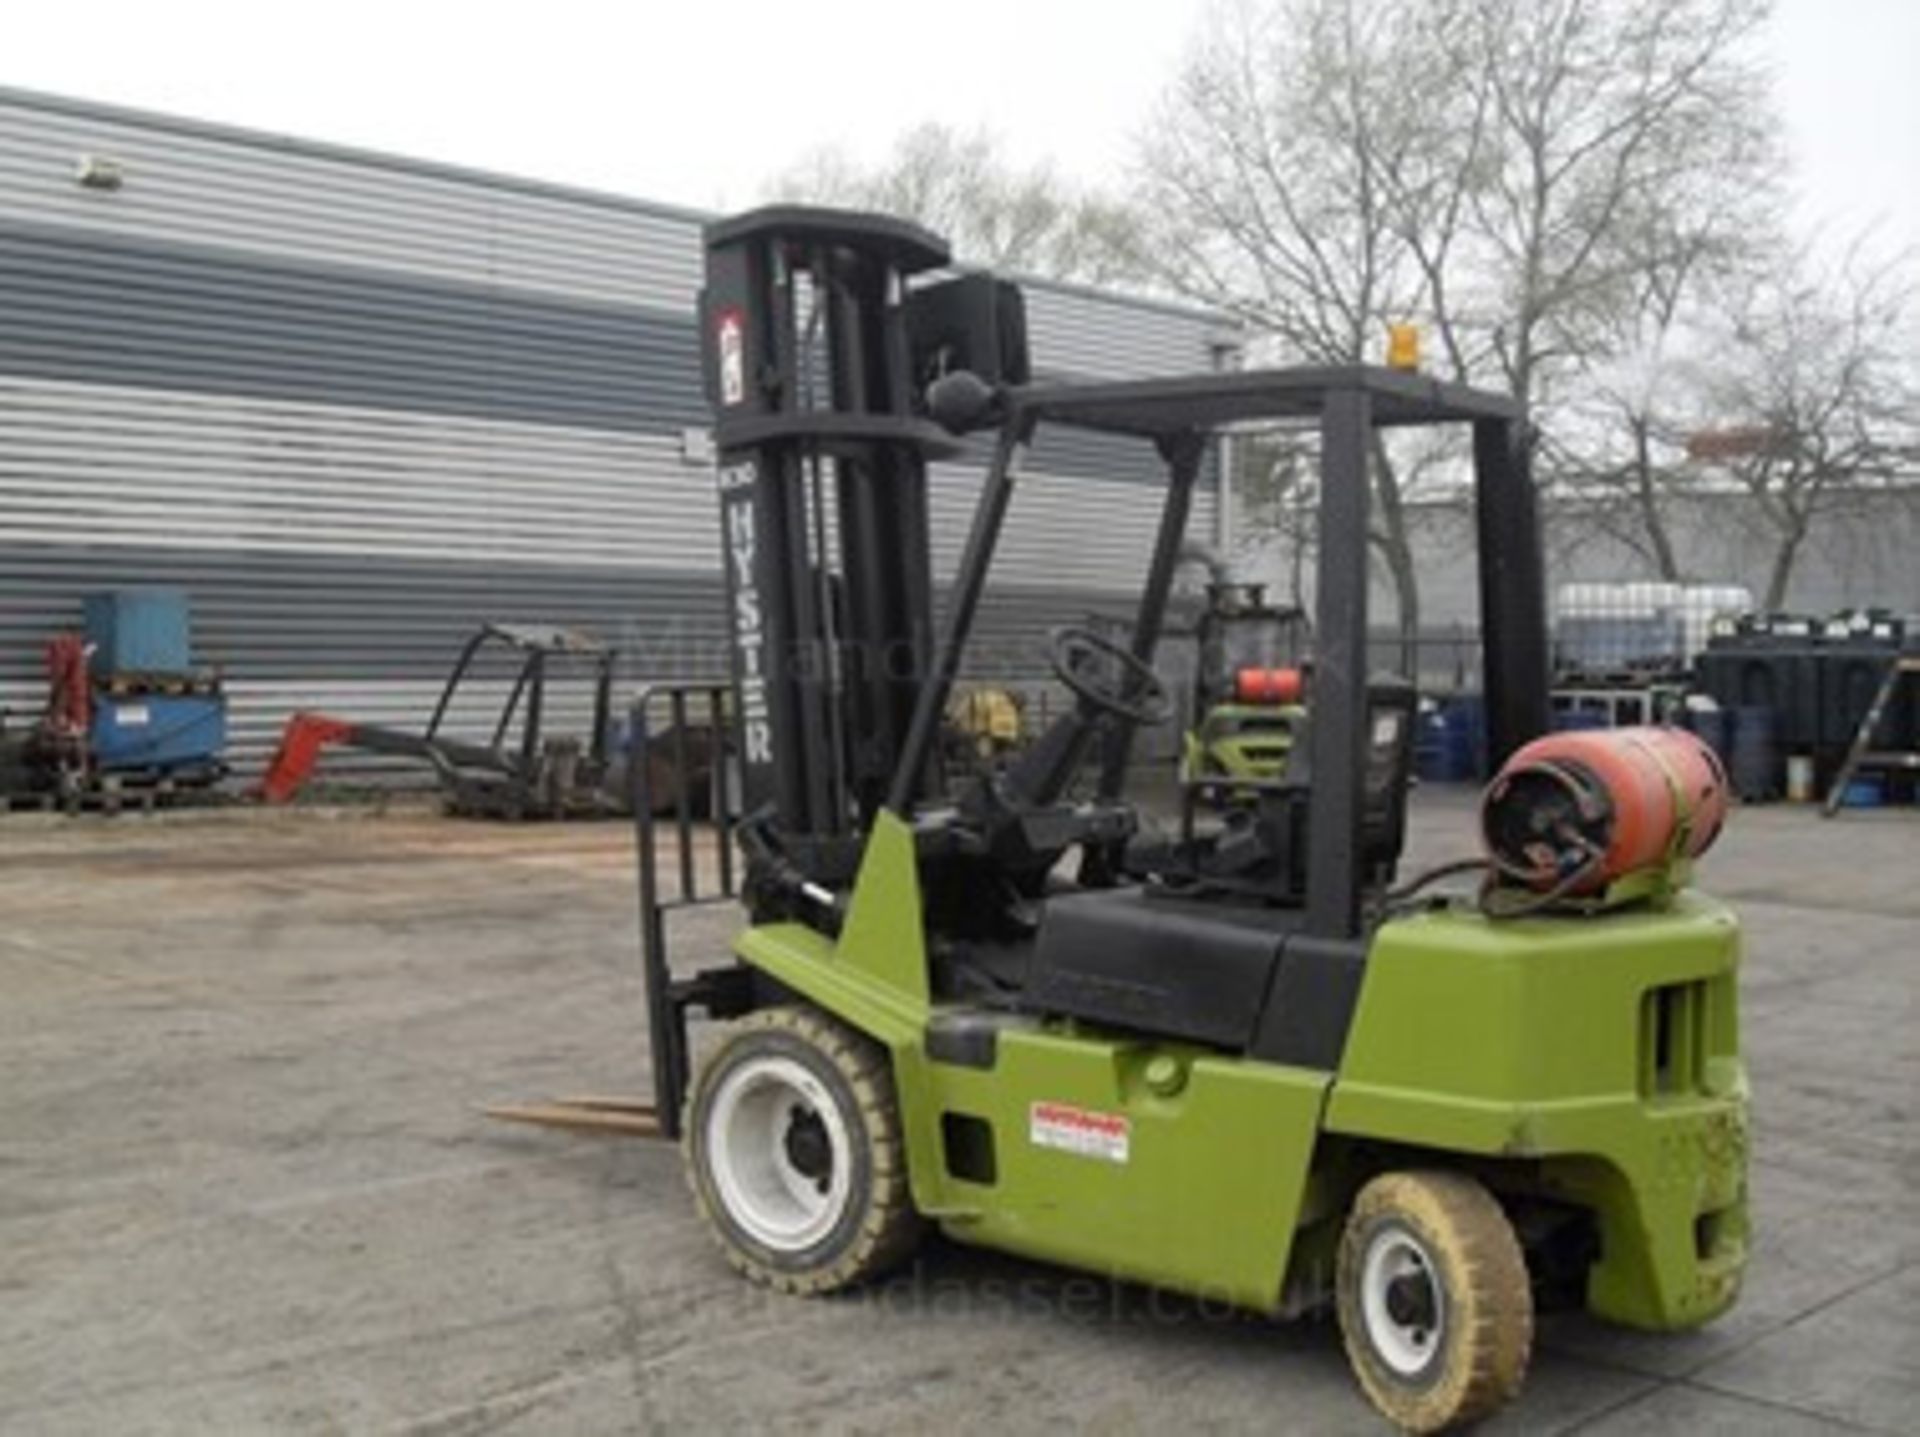 1991 HYSTER H20XL LPG COUNTERBALANCE FORK TRUCK - Image 4 of 4